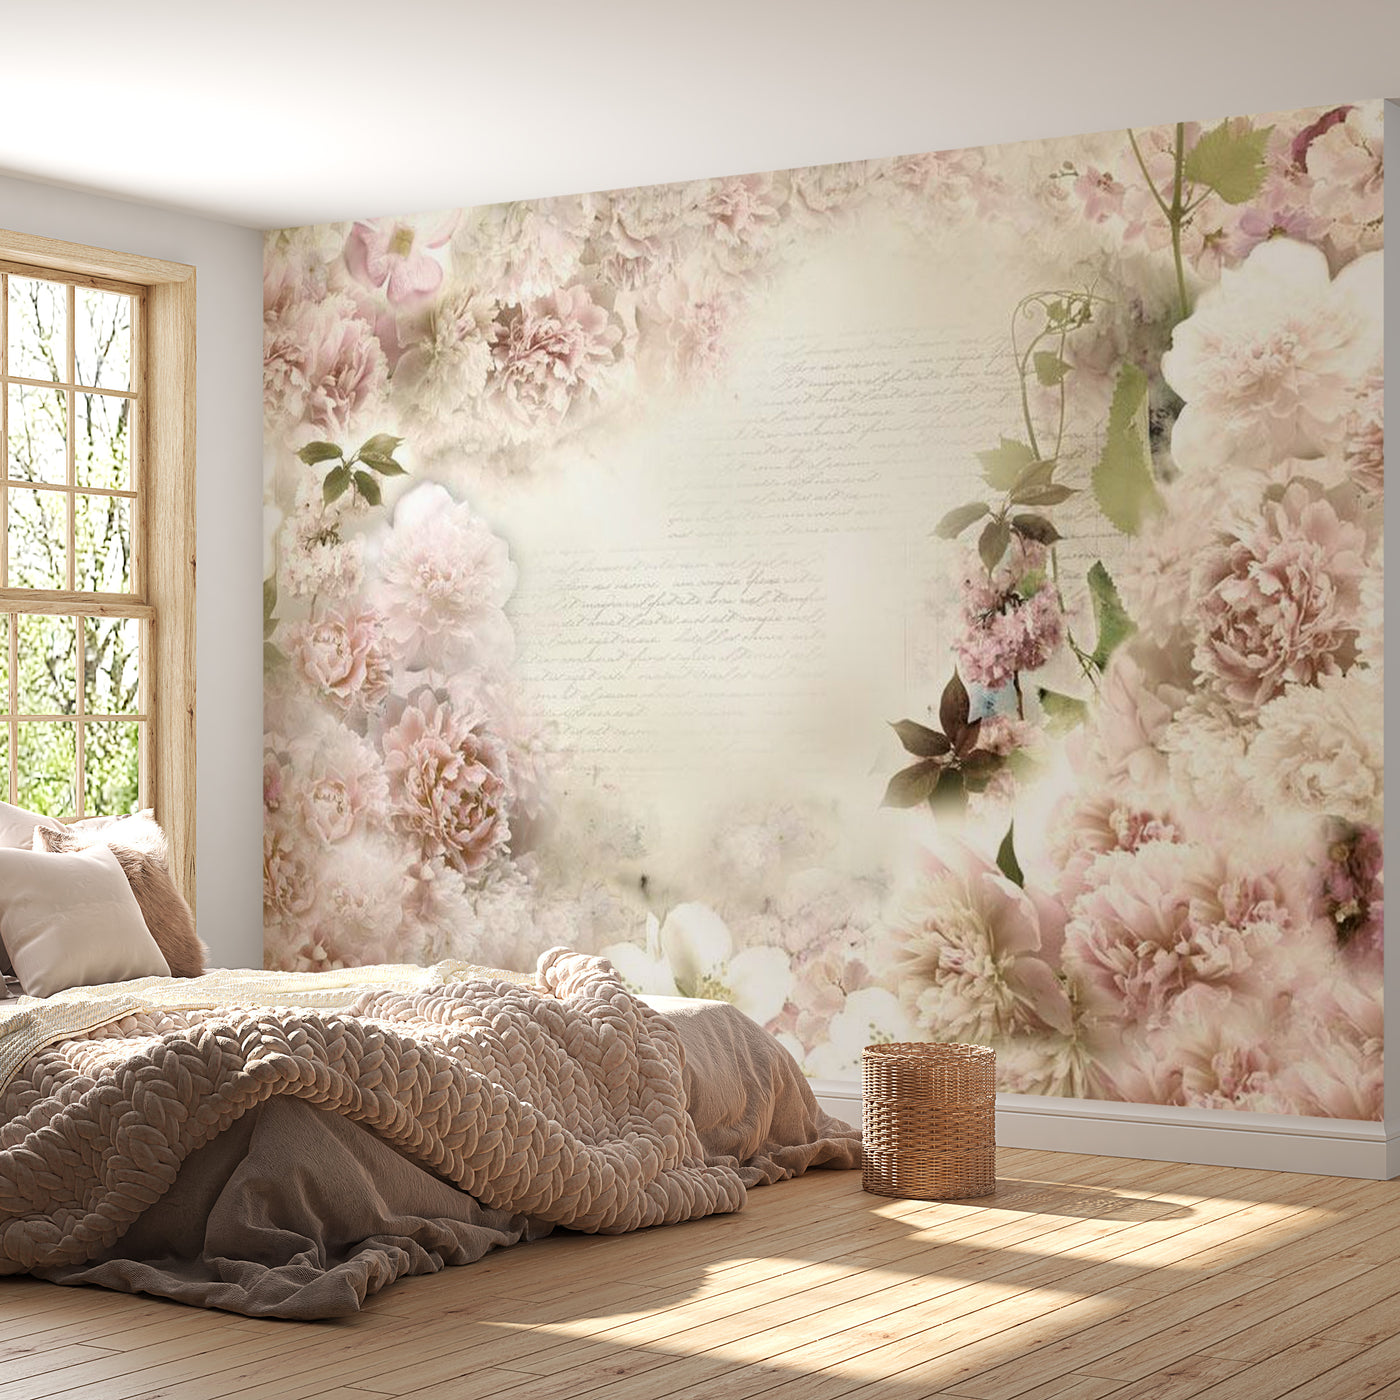 Peel & Stick Floral Wall Mural - Subtle Scent - Removable Wall Decals